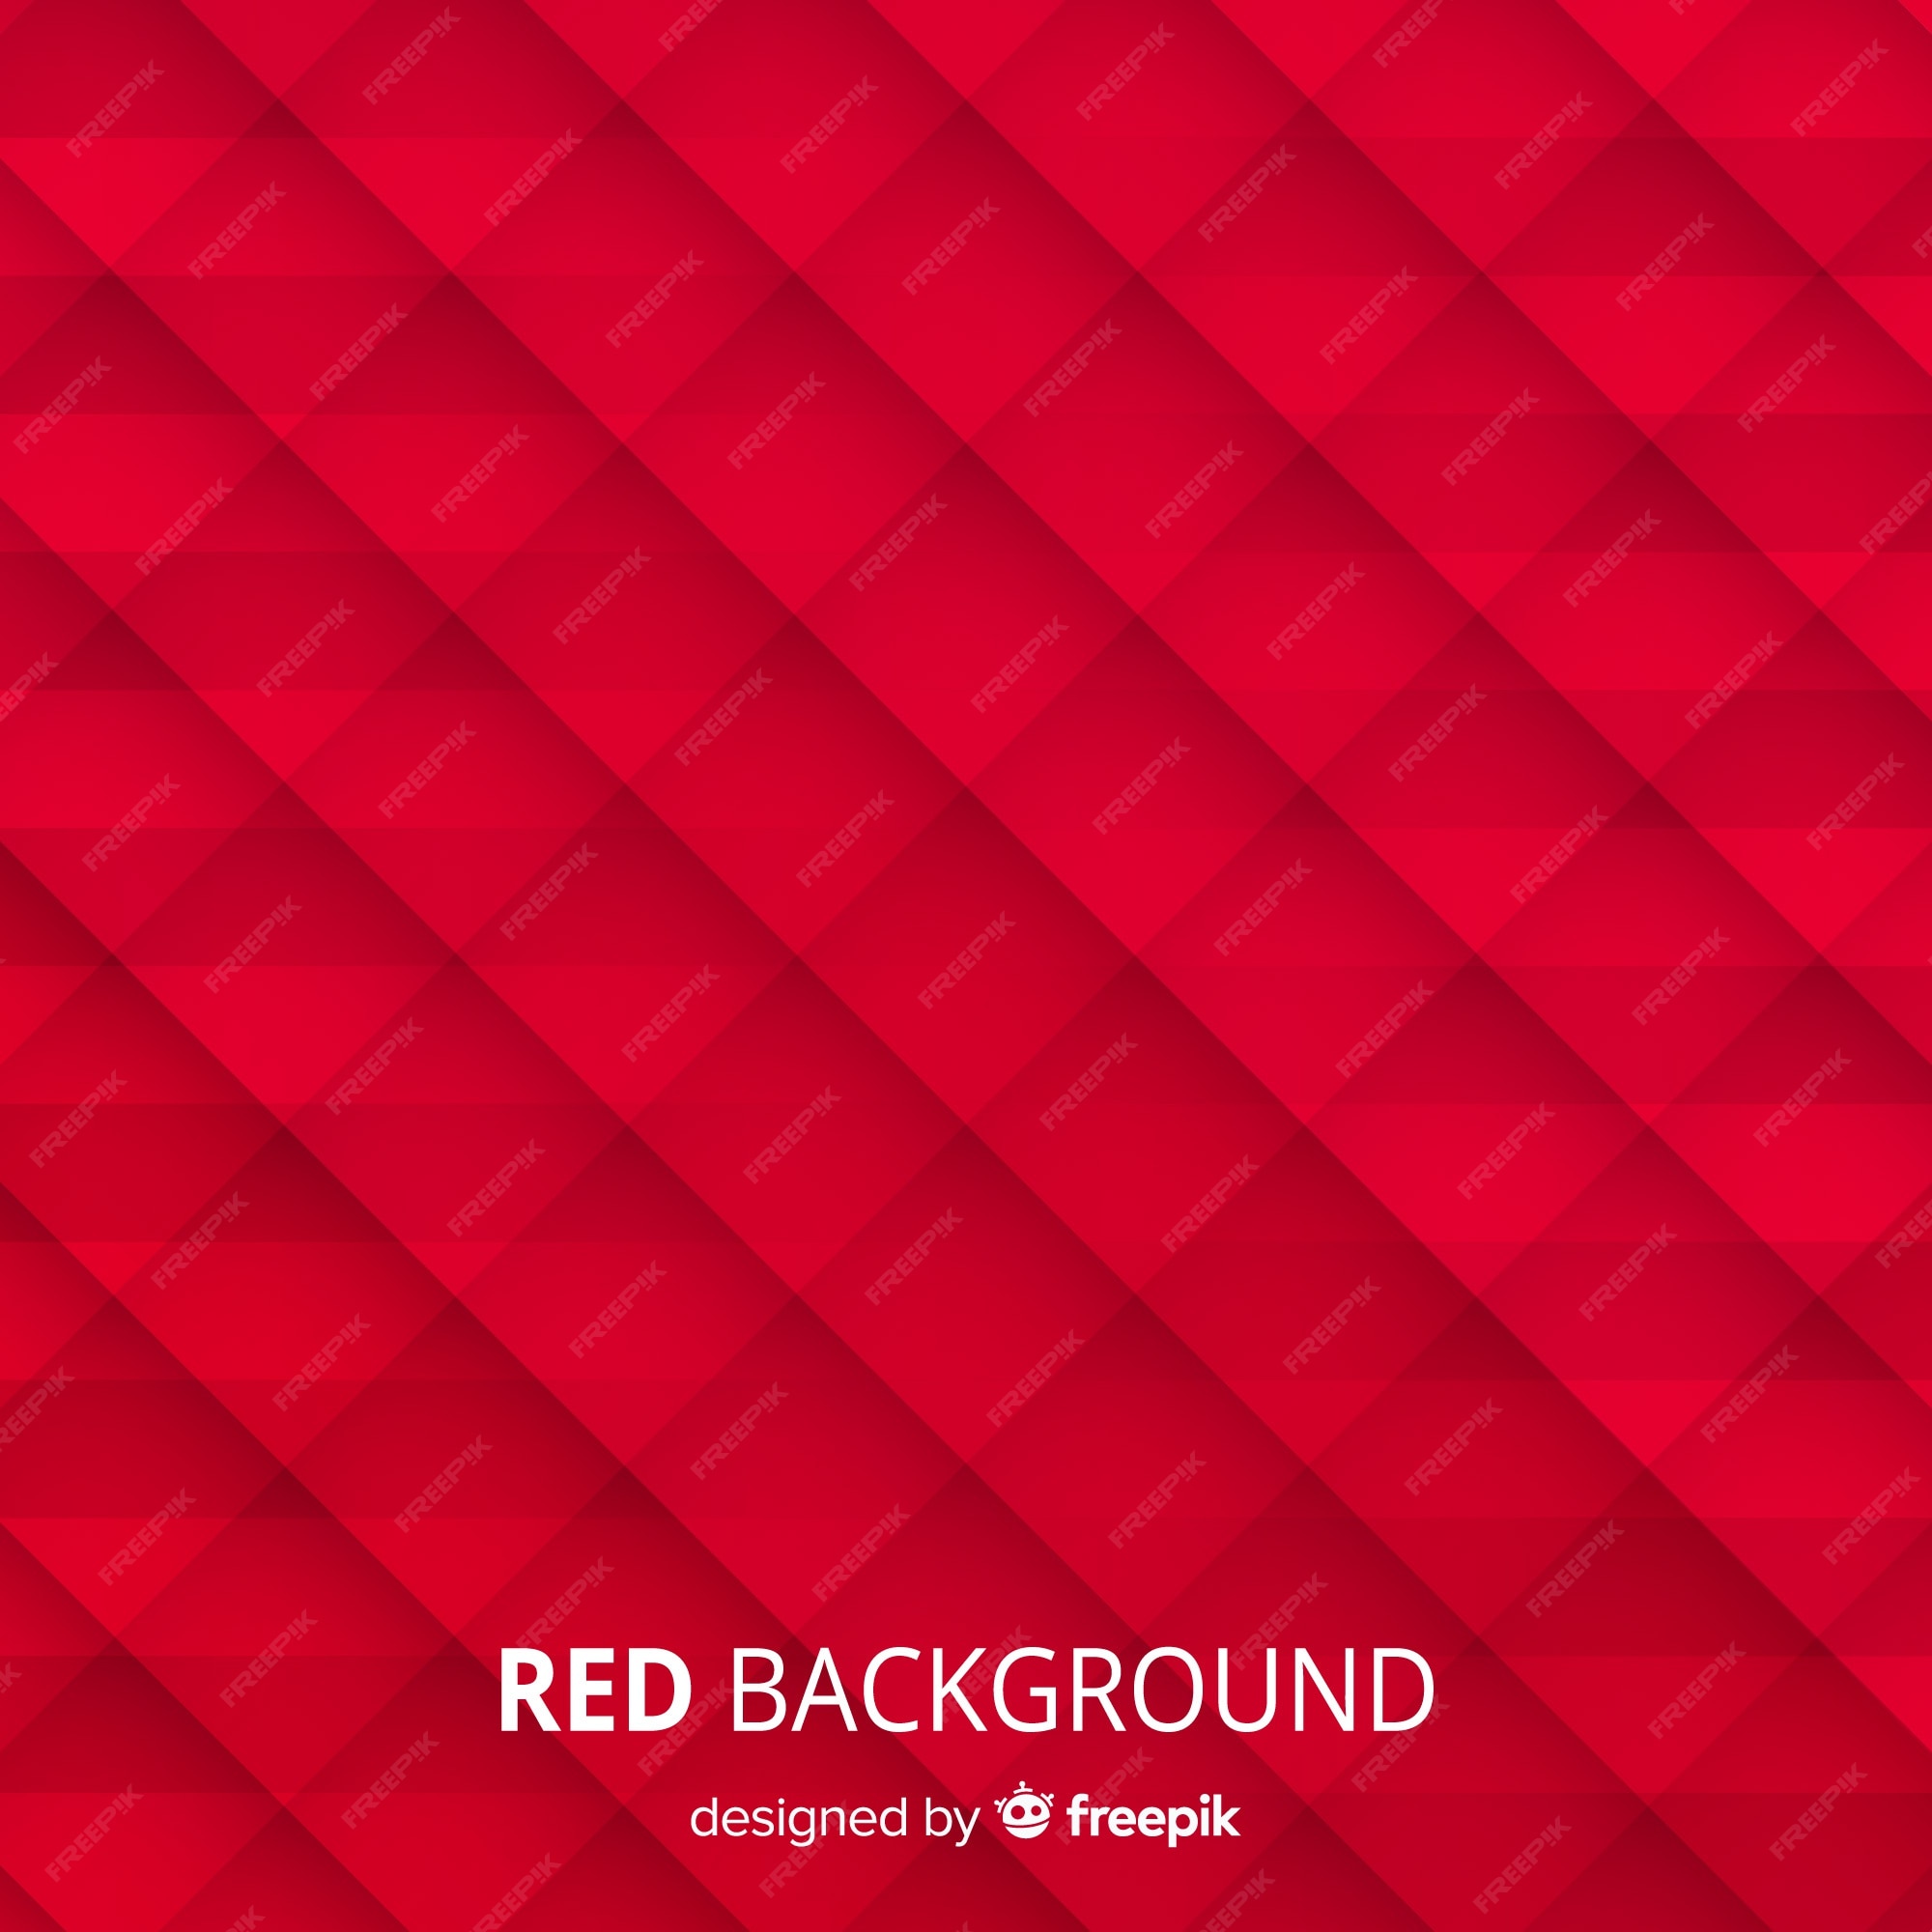 Premium Vector | Red abstract background with elegant style